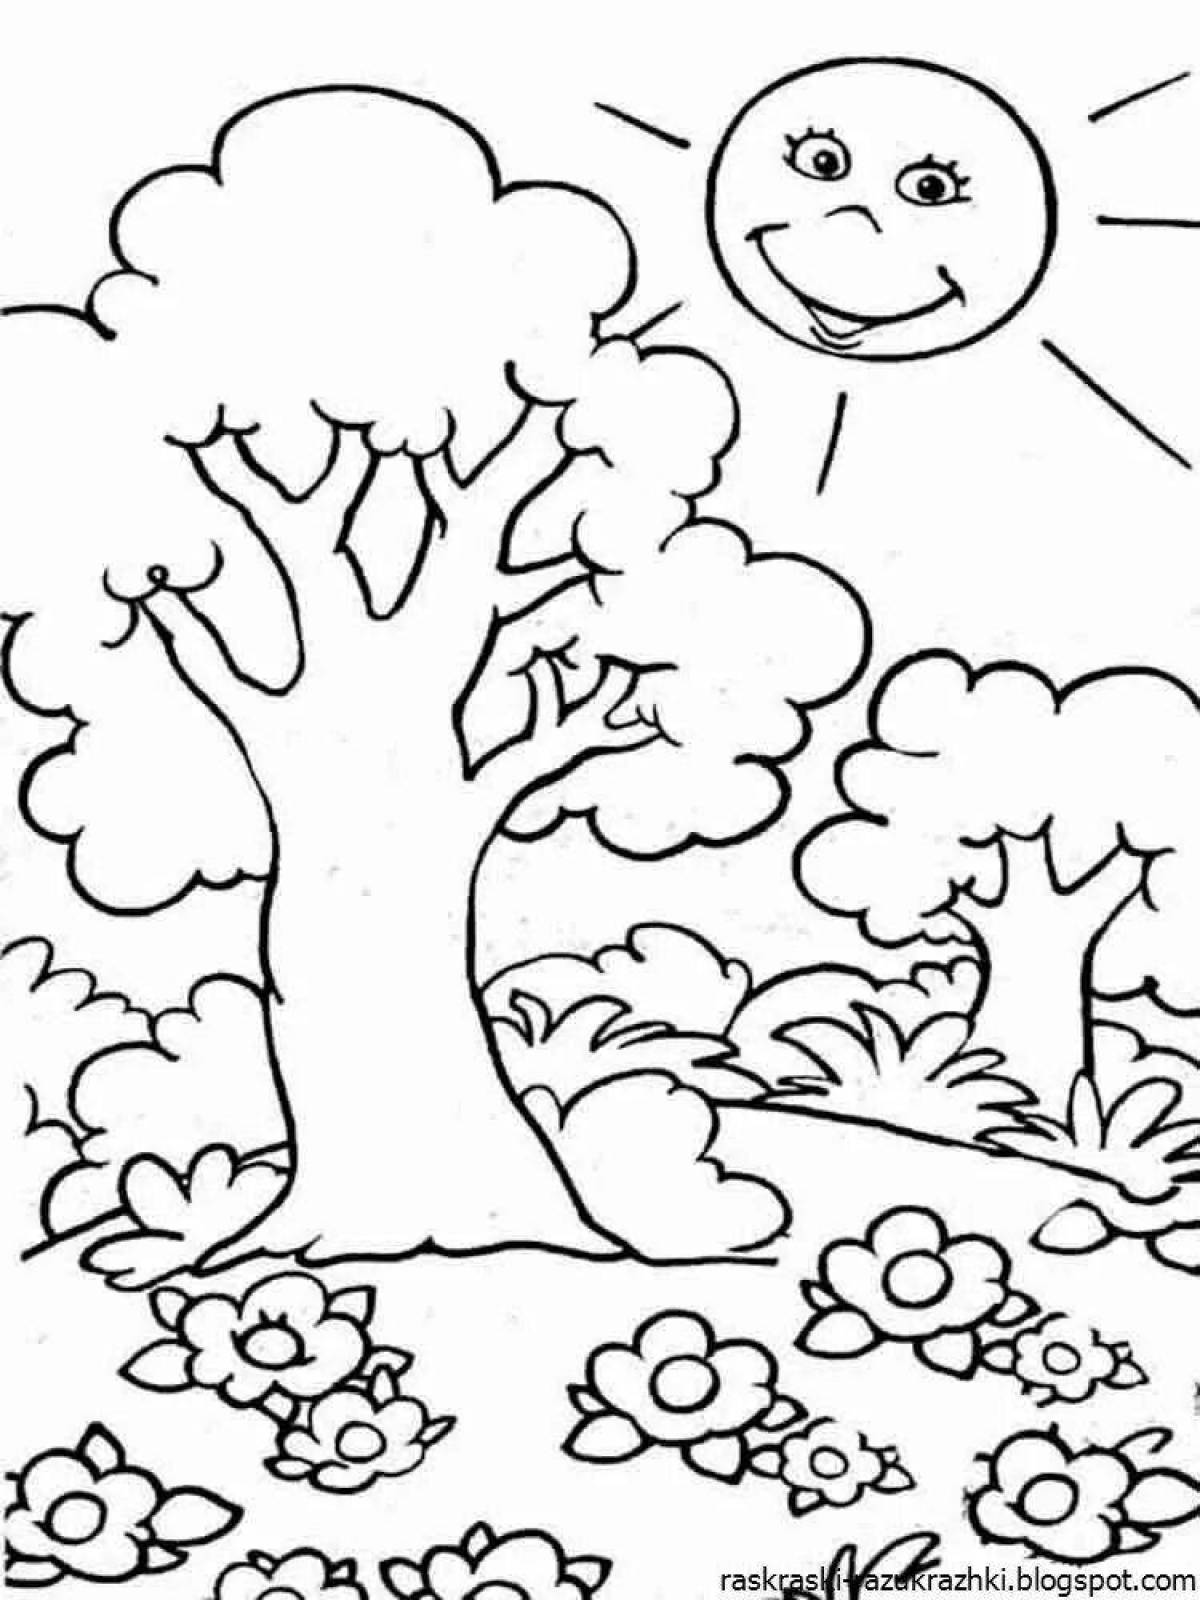 Blissful cleansing coloring page